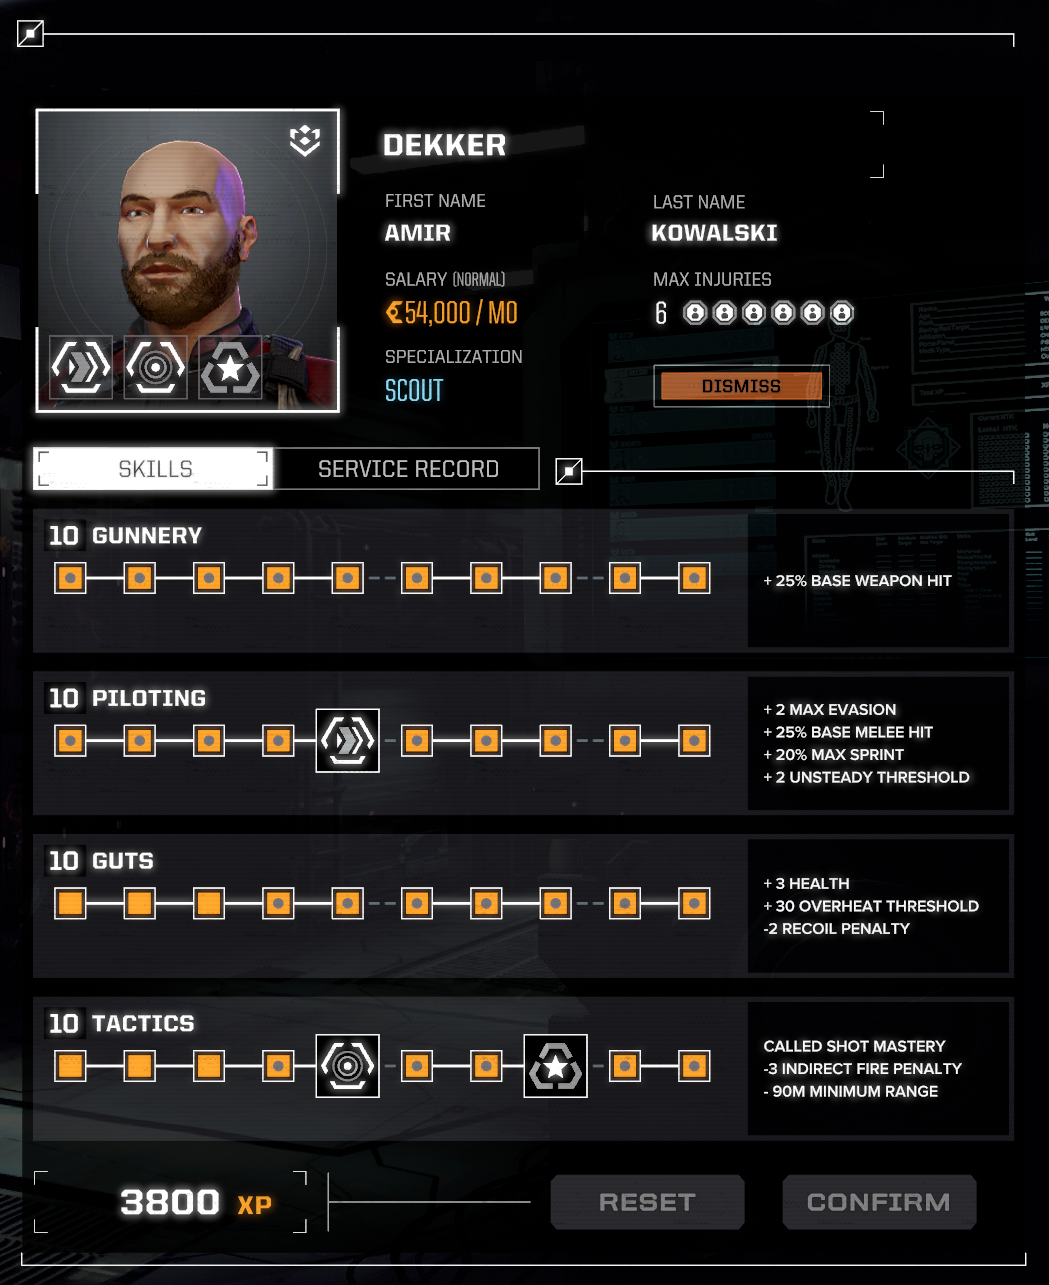 The current state of my God-Dekker